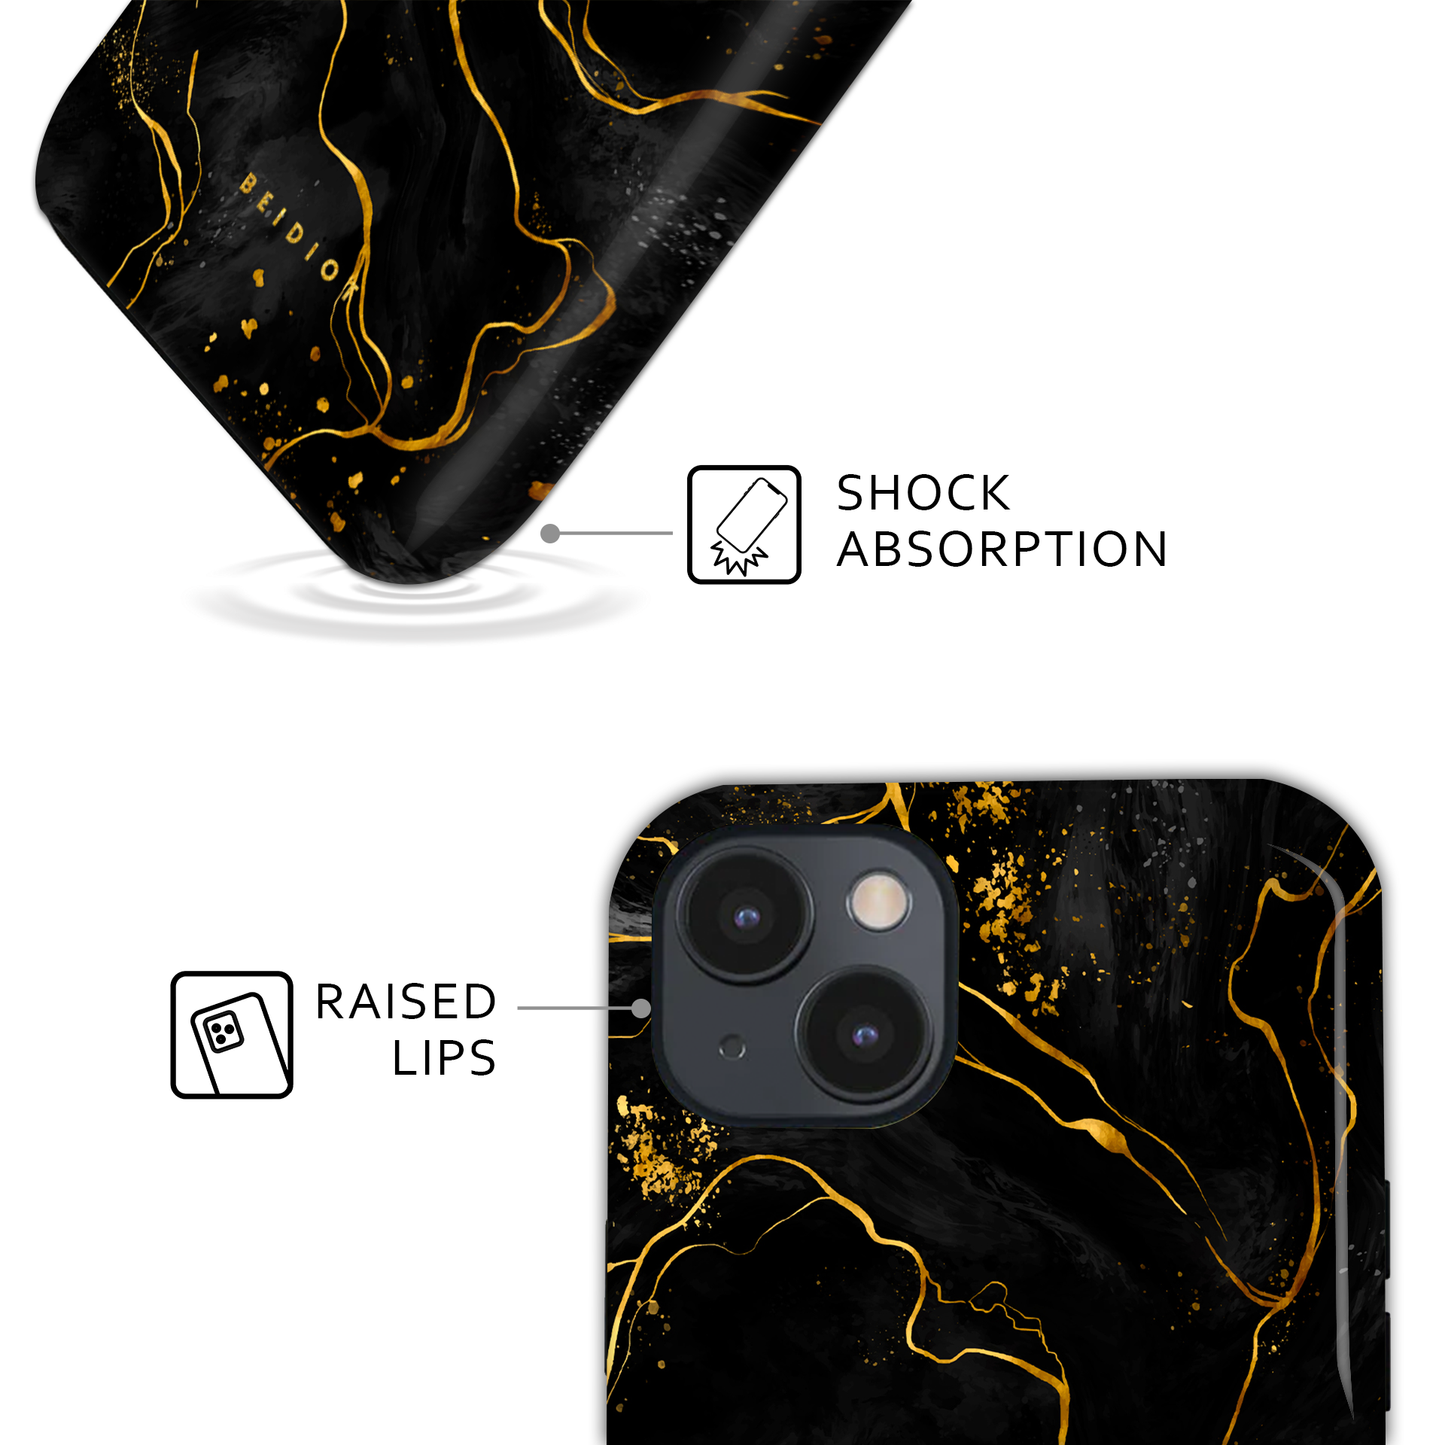 Golden Ashes iPhone Case